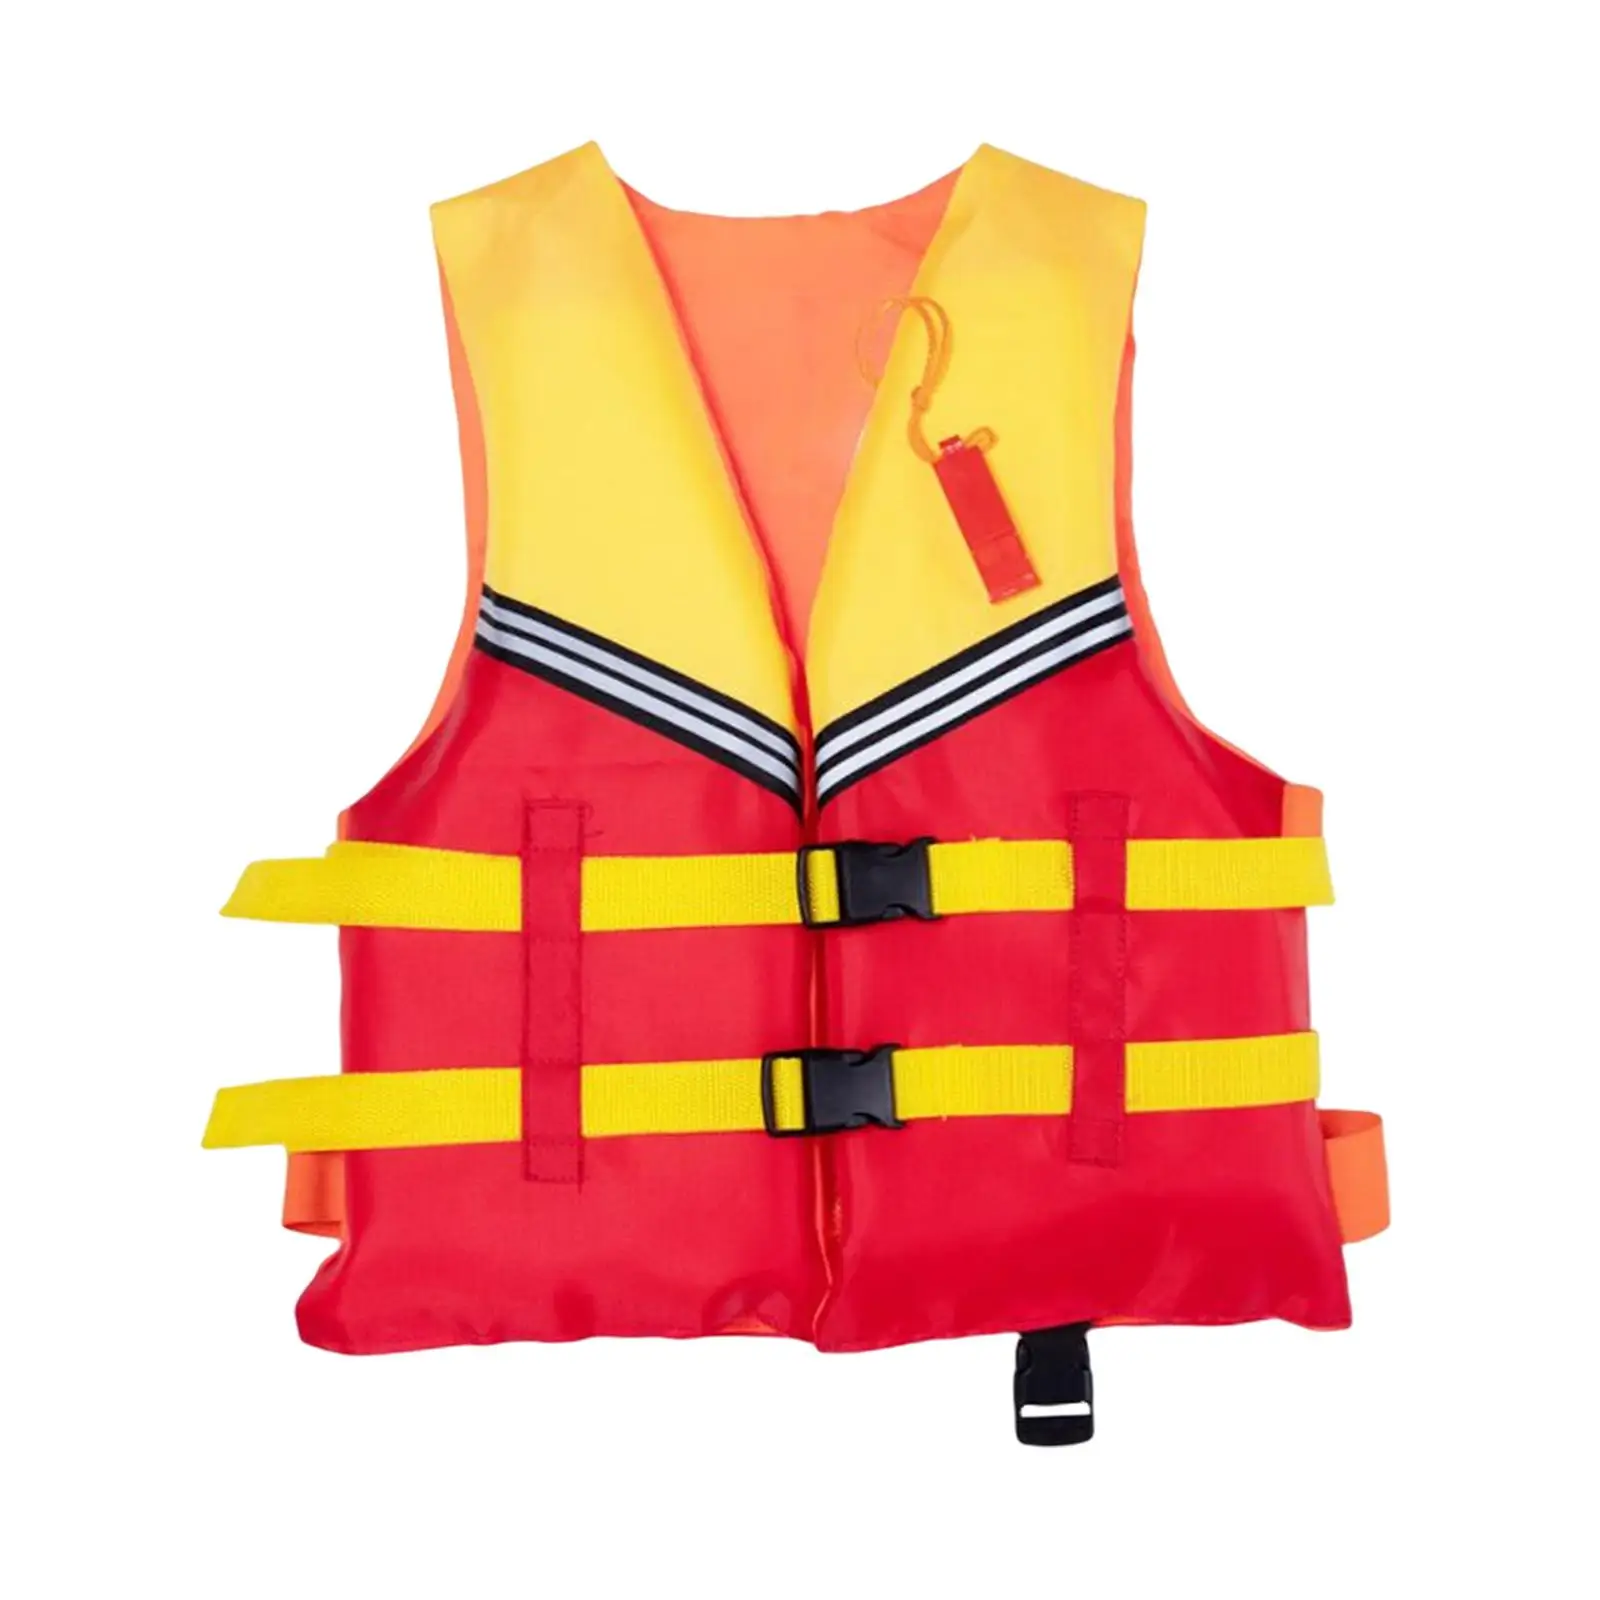 Outdoor Life Jacket Learn to Swim Adjustable with Whistle Children Swim Vest for Swimming Kayaking Surfing Wakeboarding Skiing